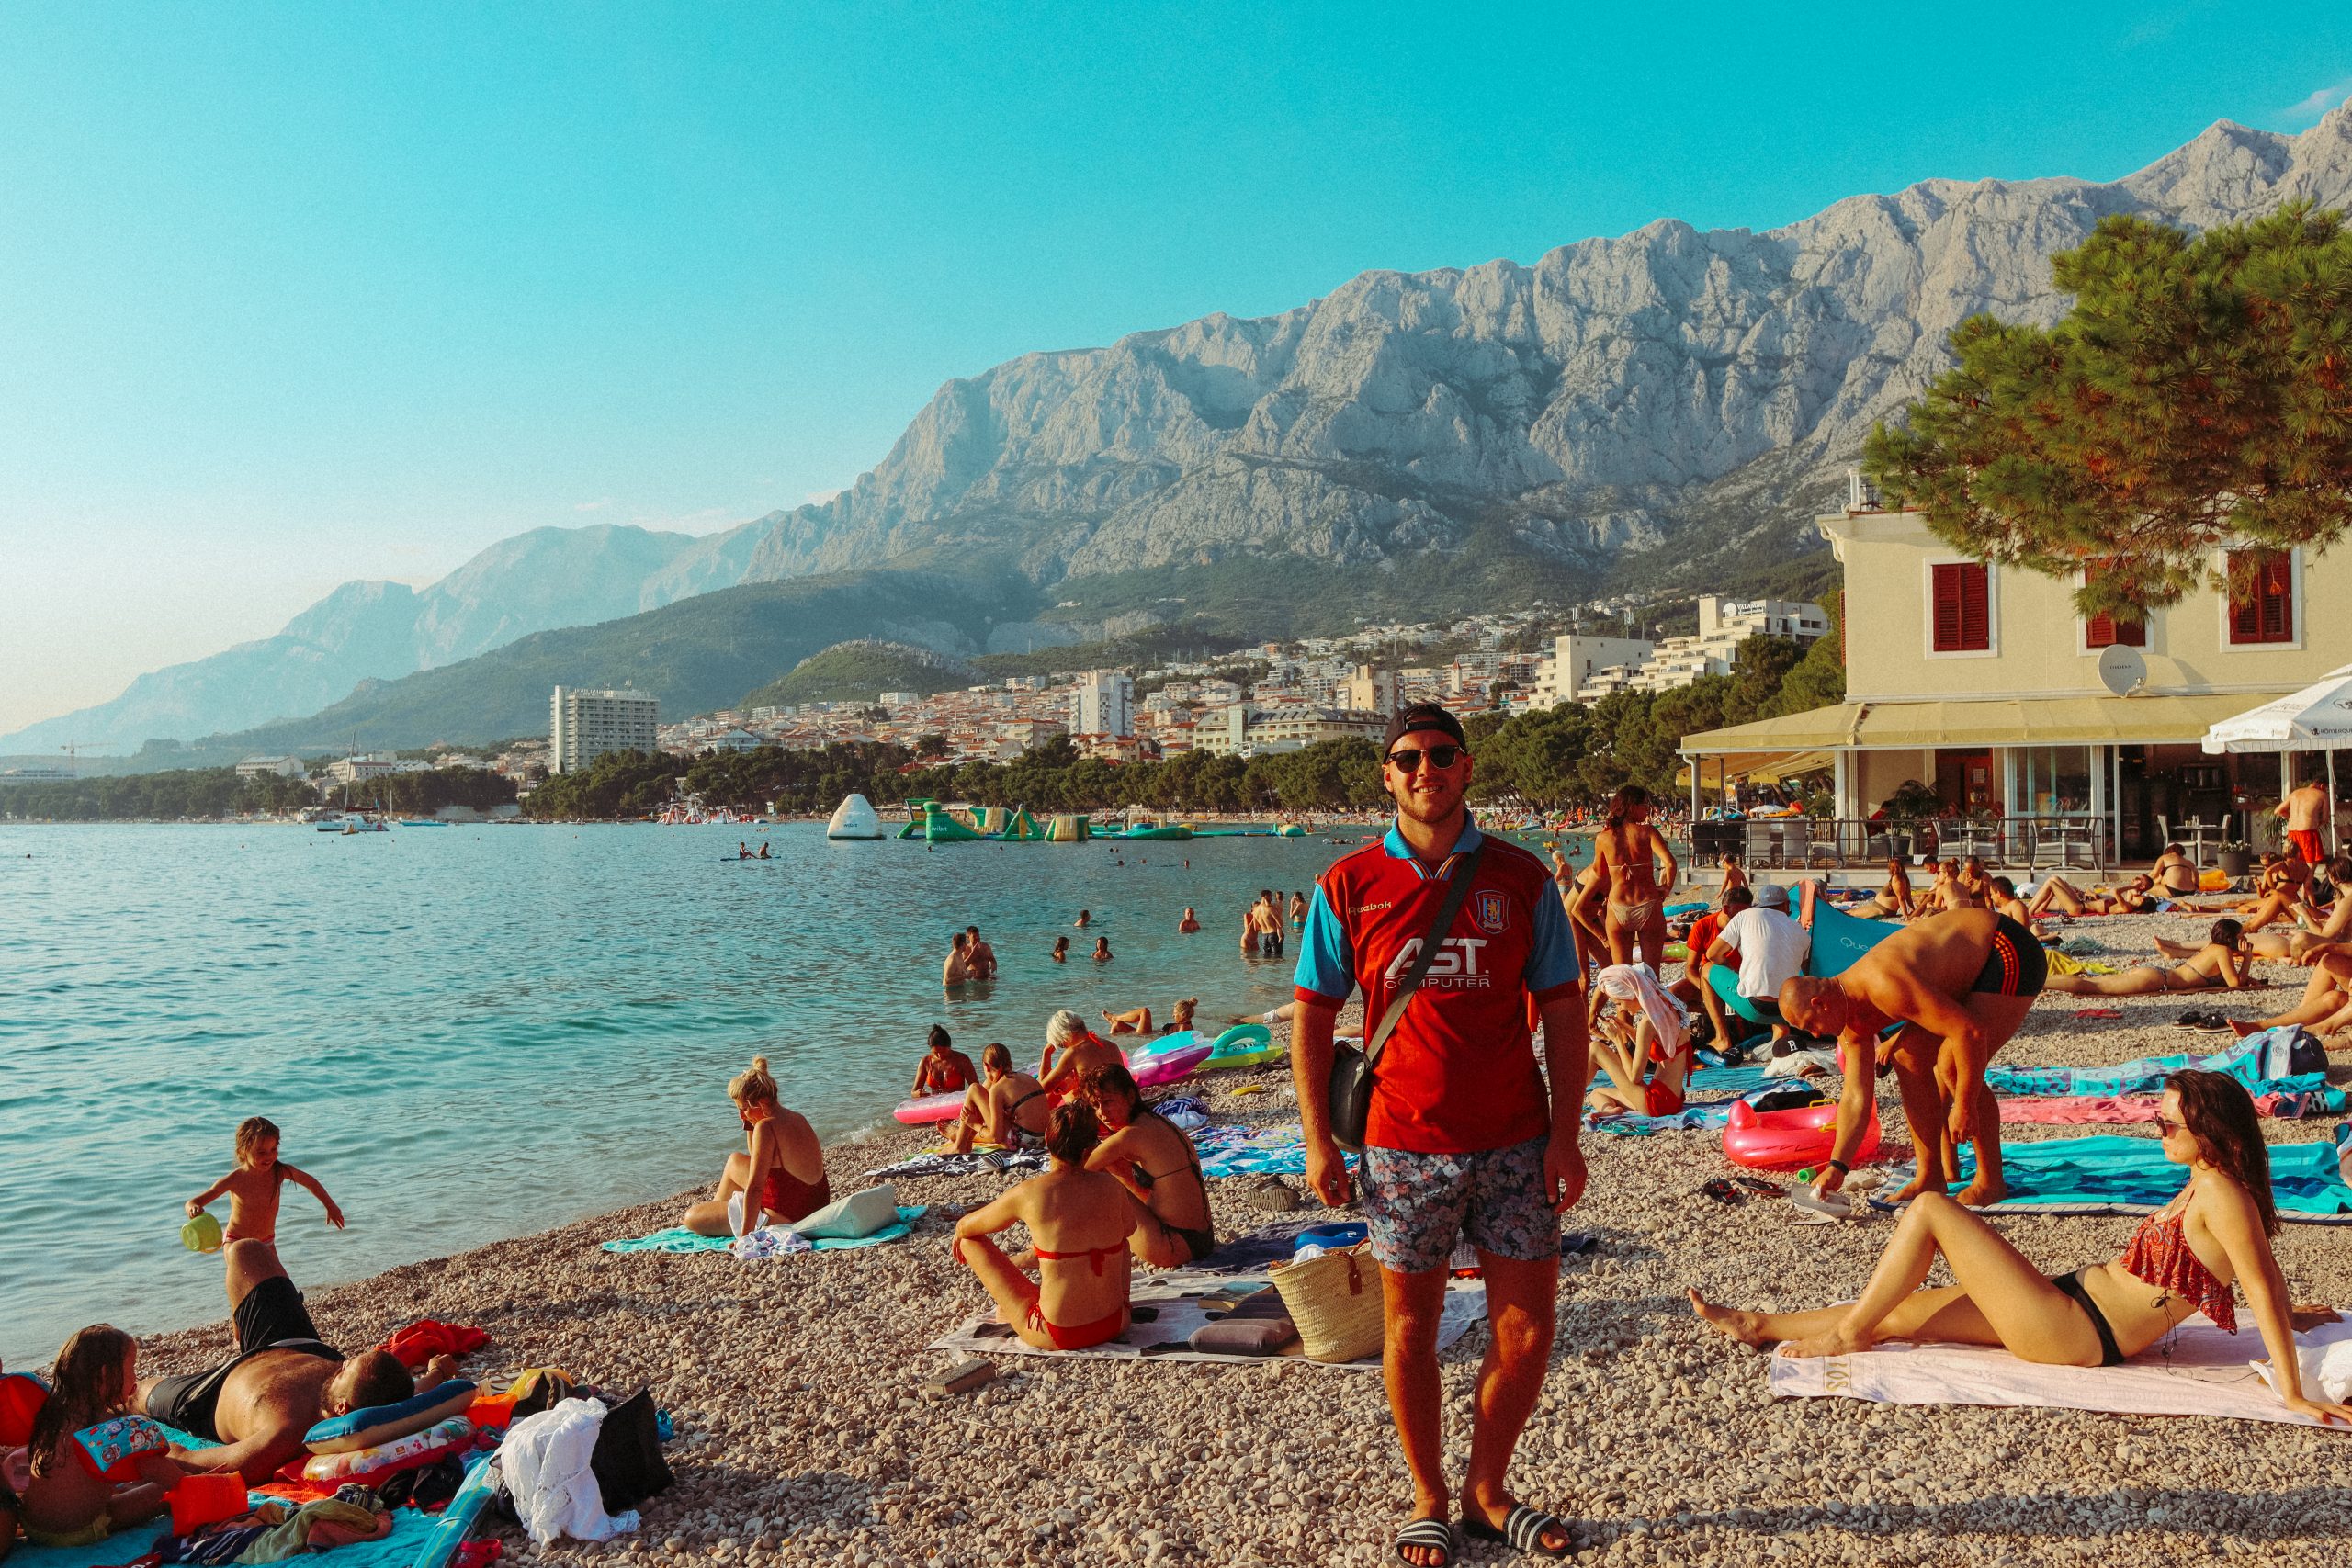 A man stood on a busy pebble beach with Mount Biokovo in the background. Things to see in Makarska